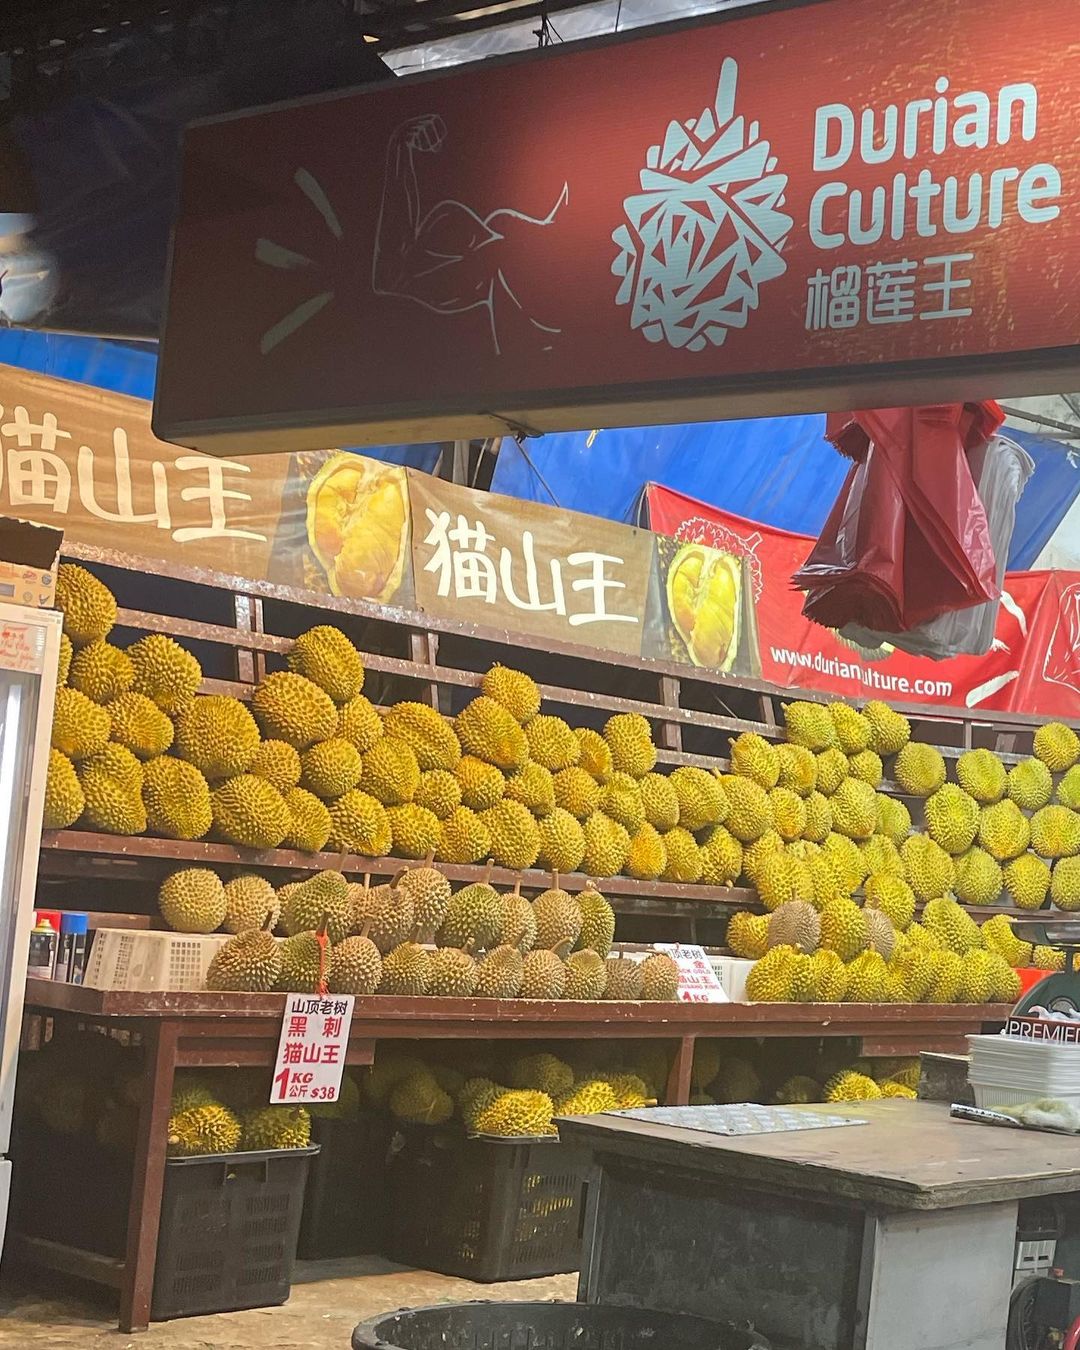 durian culture - display